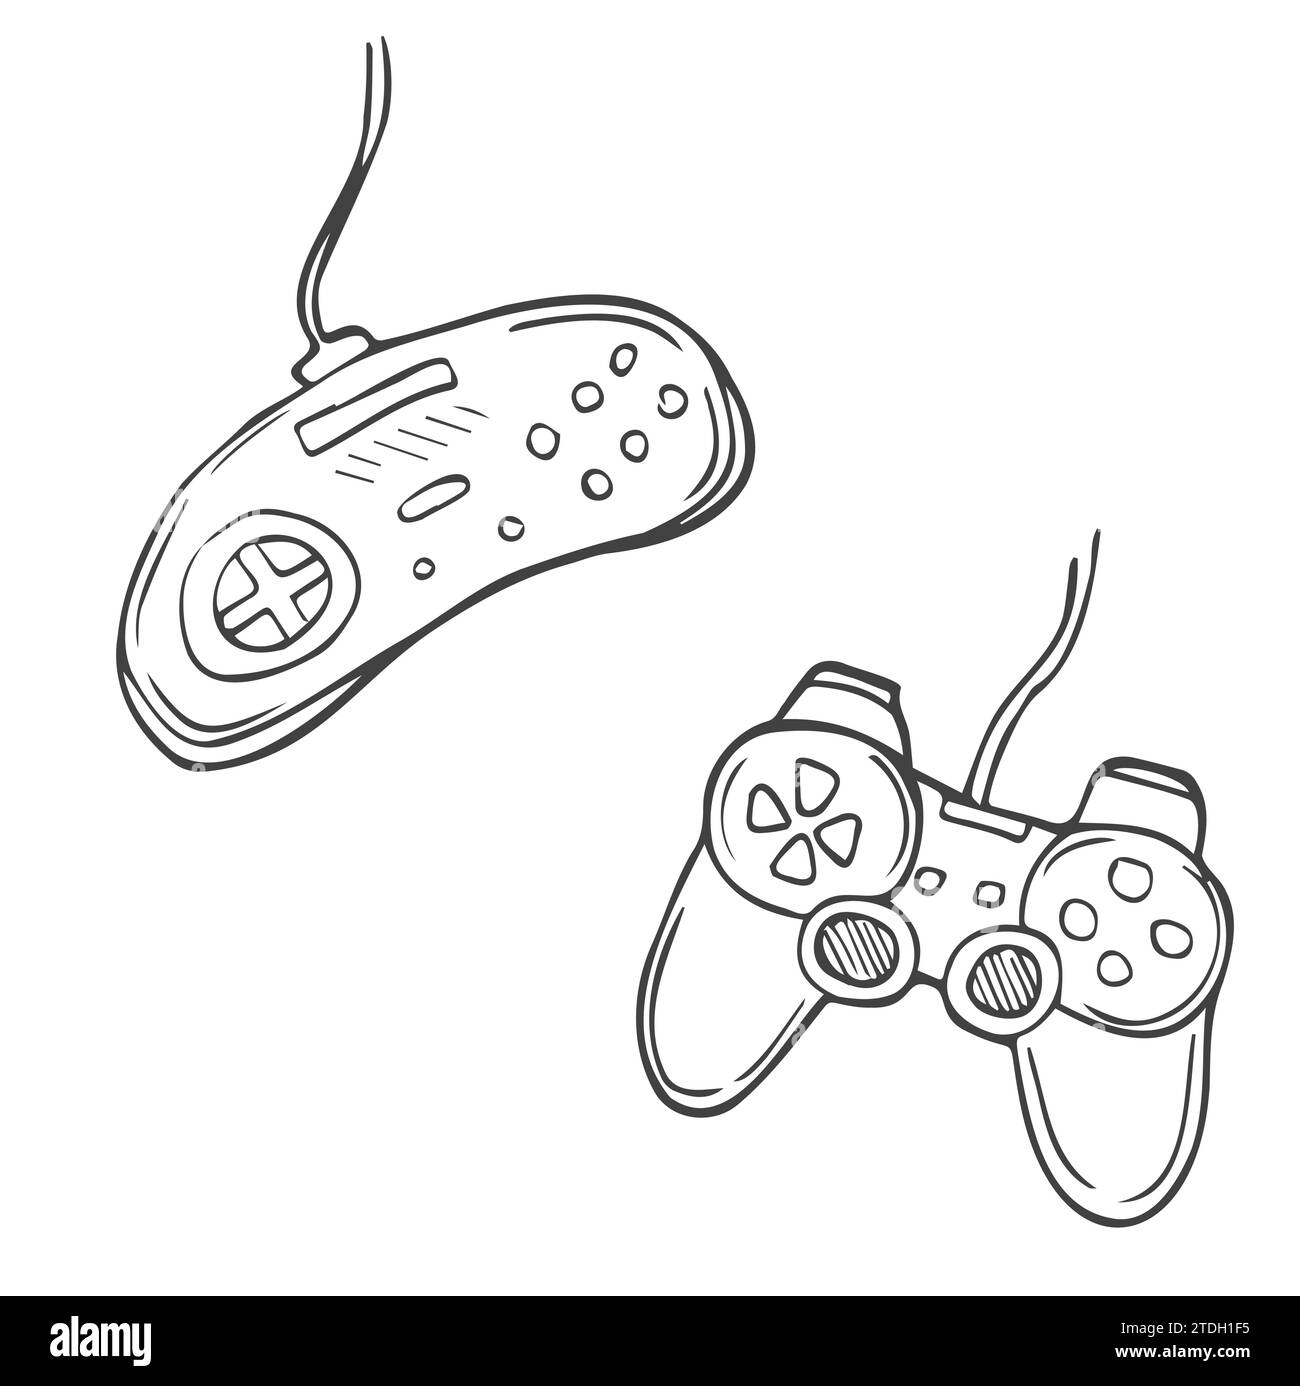 hand drawn game pad. doodle sketch icon Stock Vector